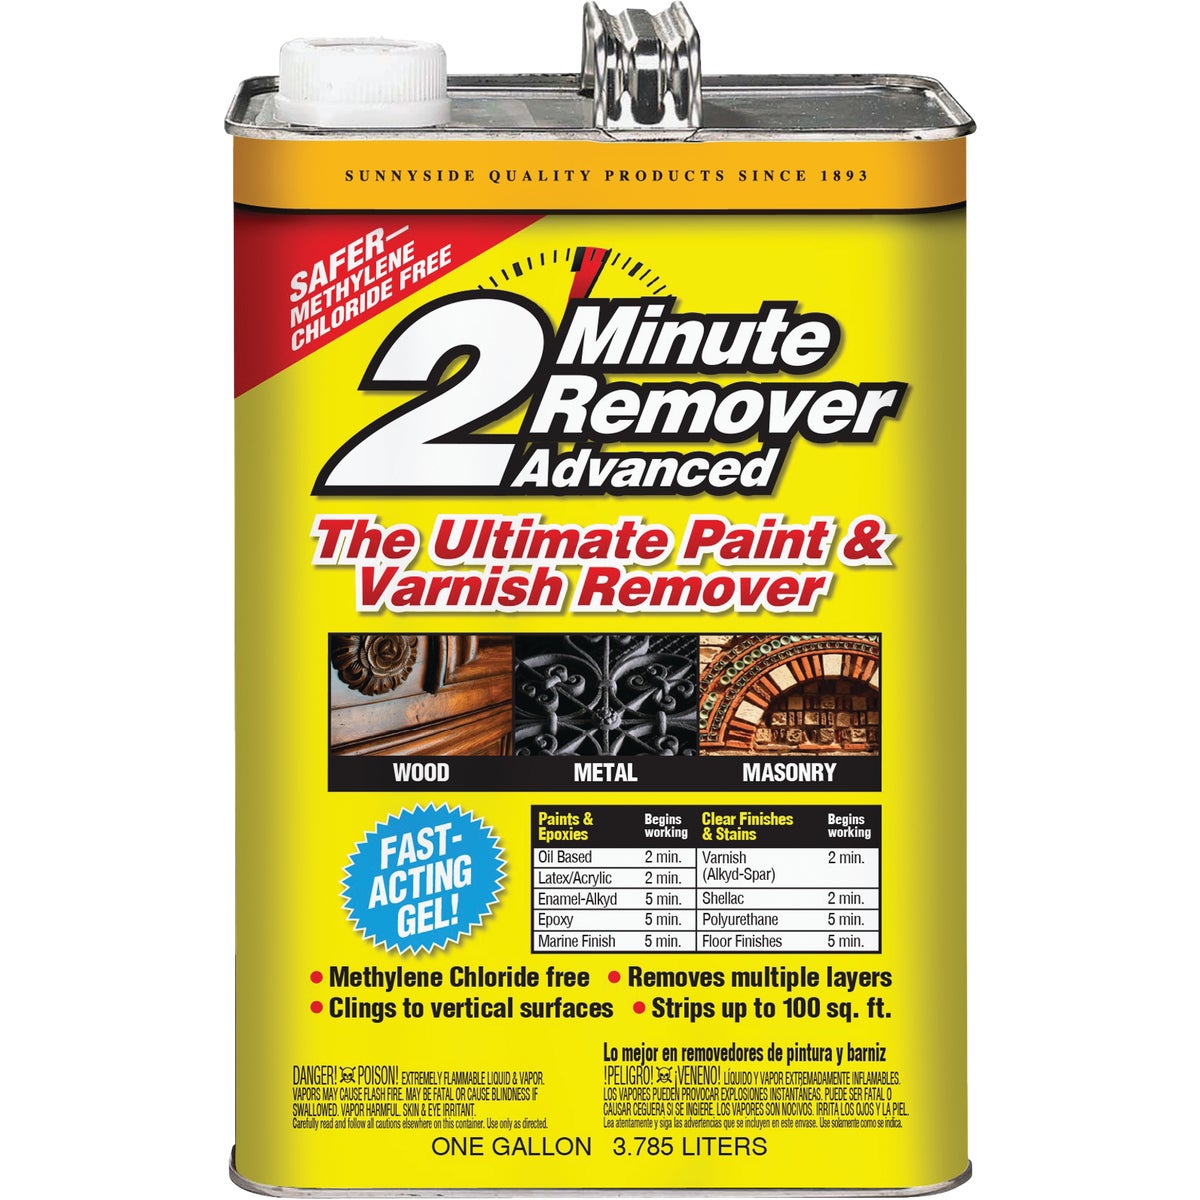 Sunnyside 2 Minute Remover Advanced Ultimate Gal. Gel Paint & Varnish Remover